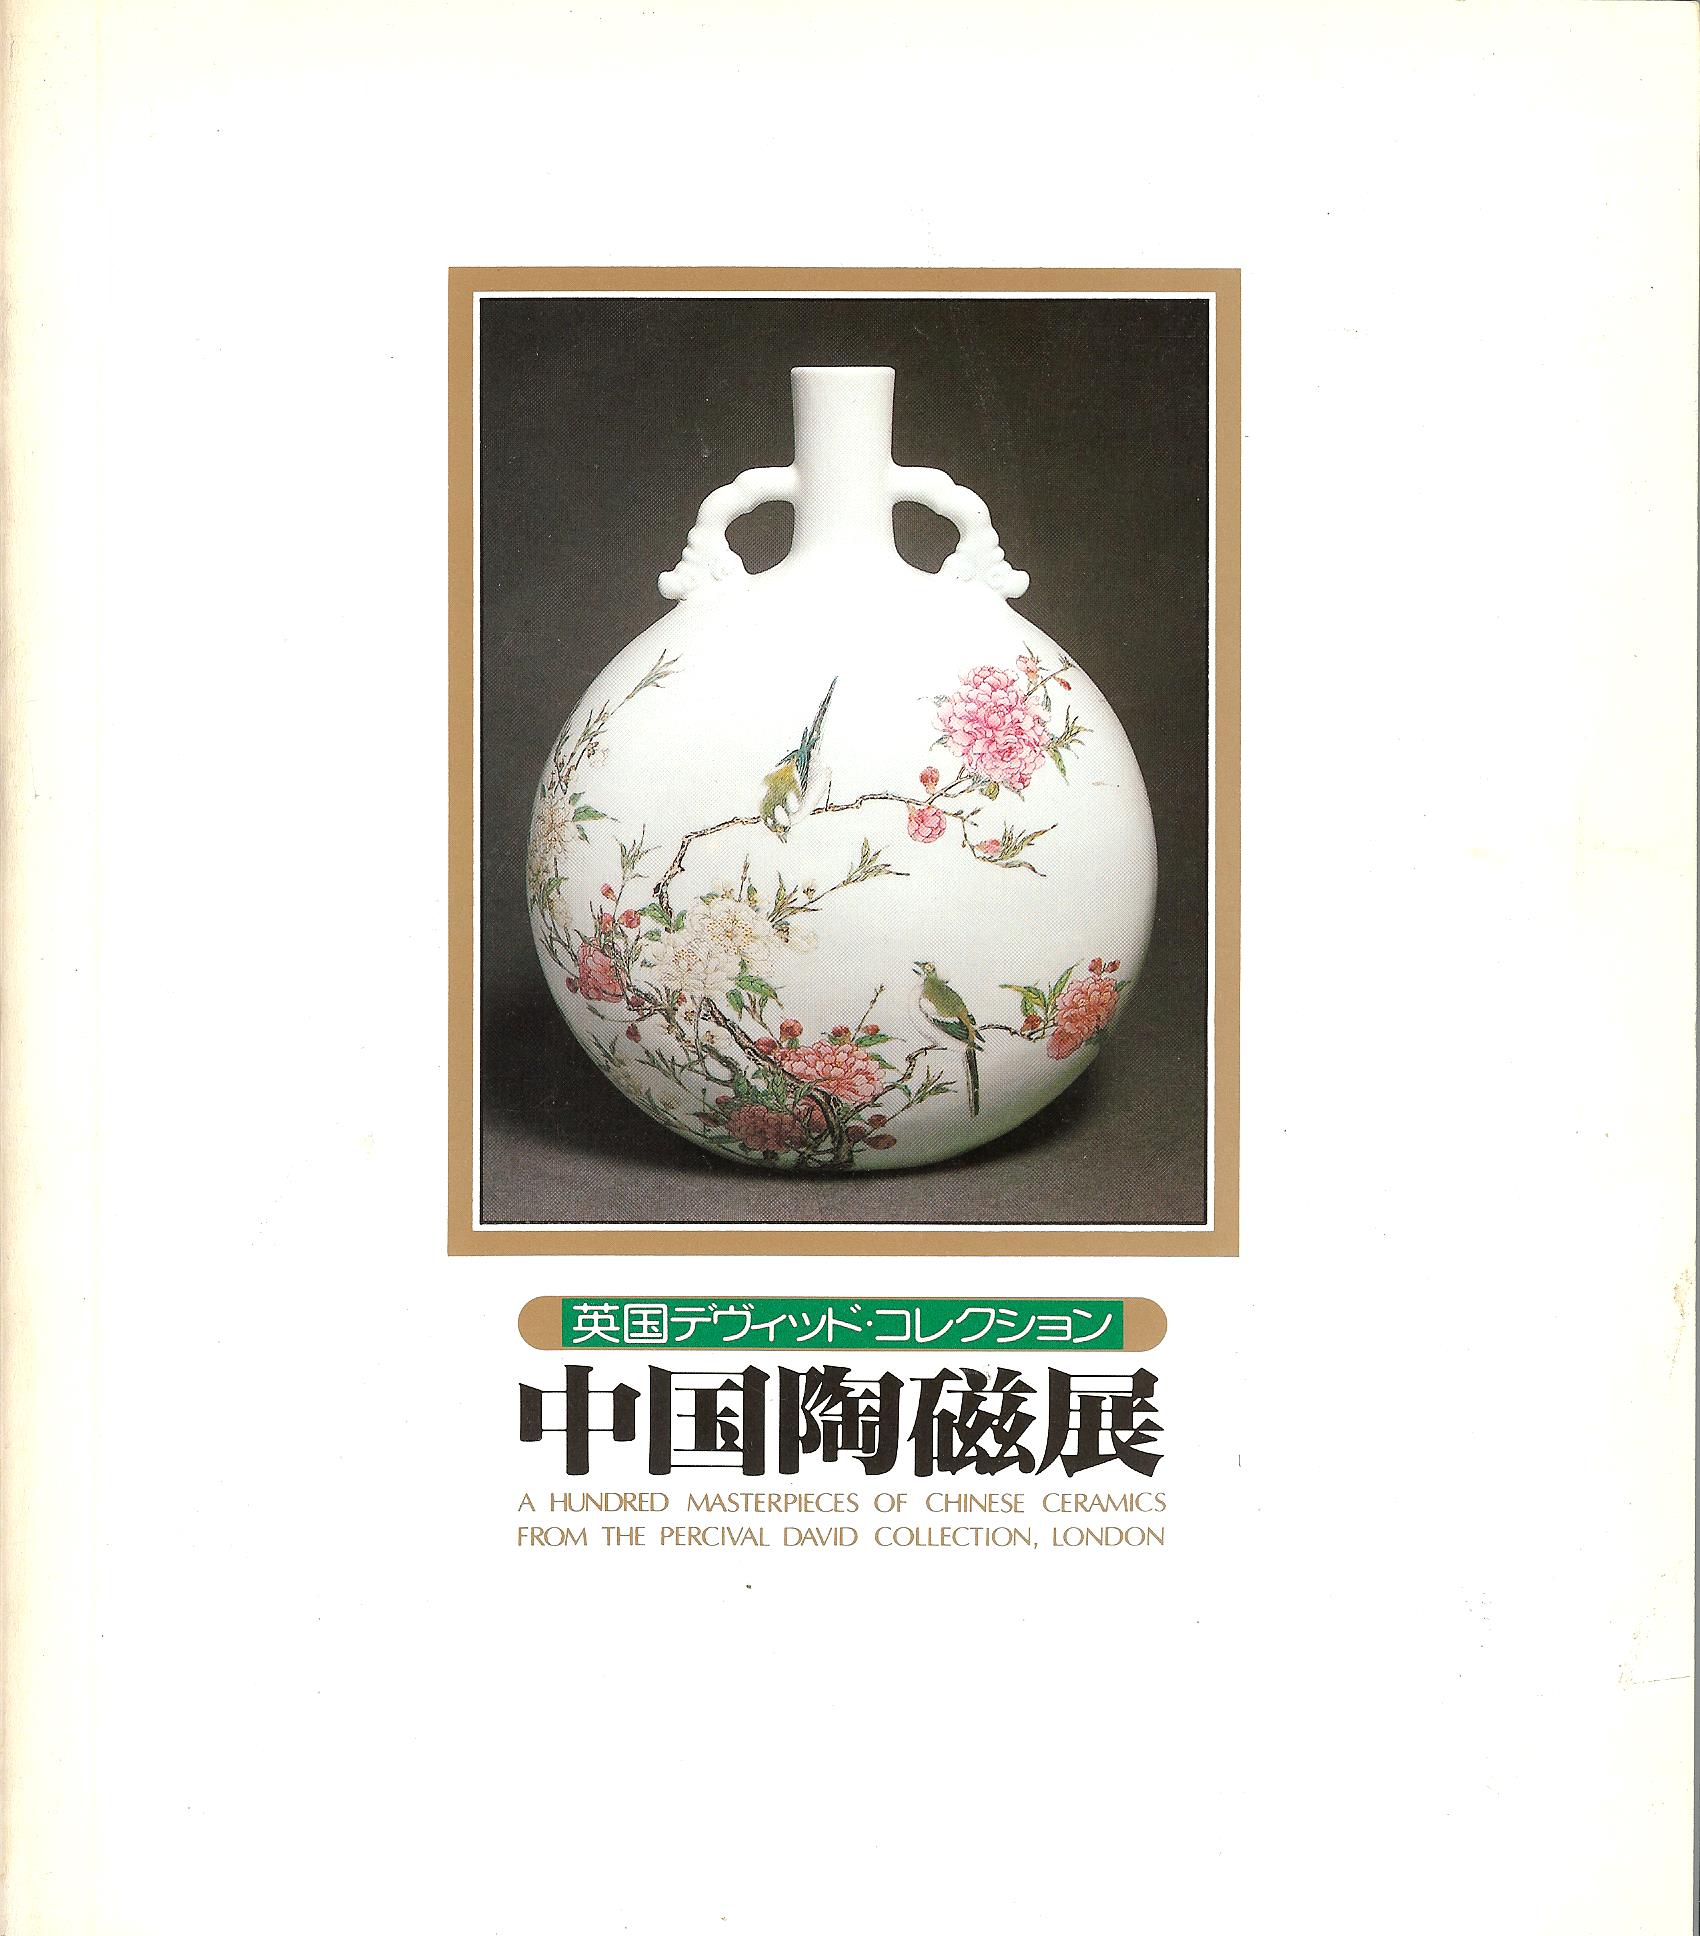 Tokyo National Museum - A Hundred Masterpieces of Chinese Ceramics from the Percival David Foundation Collection